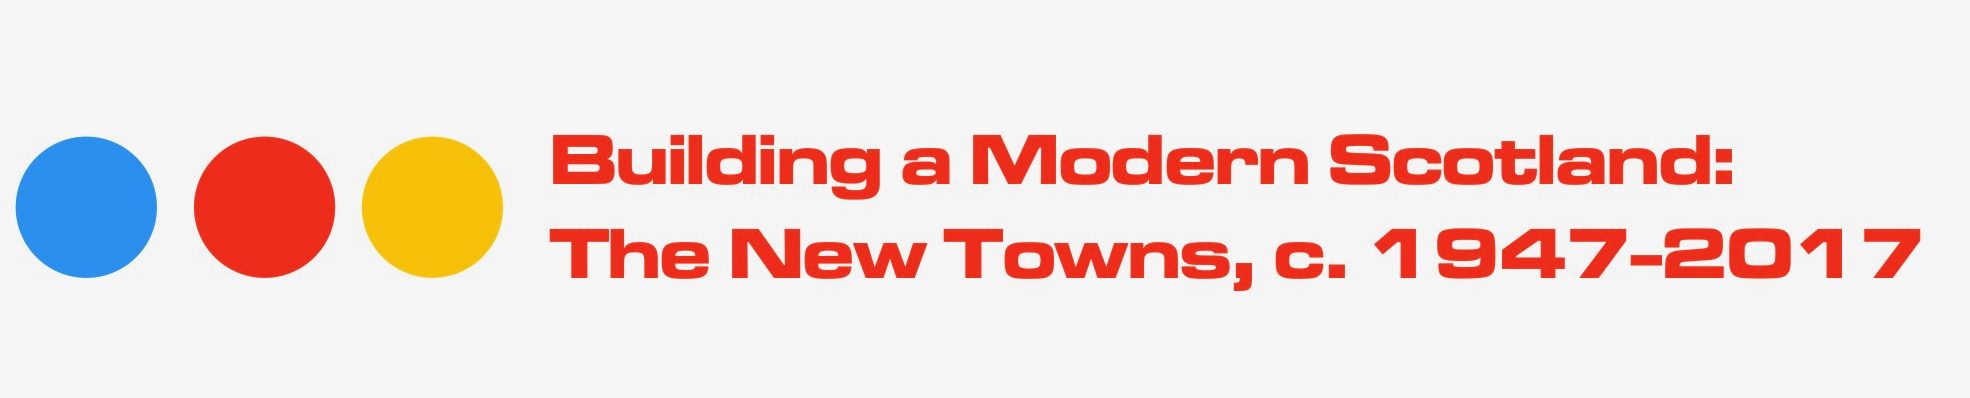 Building a Modern Scotland: The New Towns, c. 1947-2017